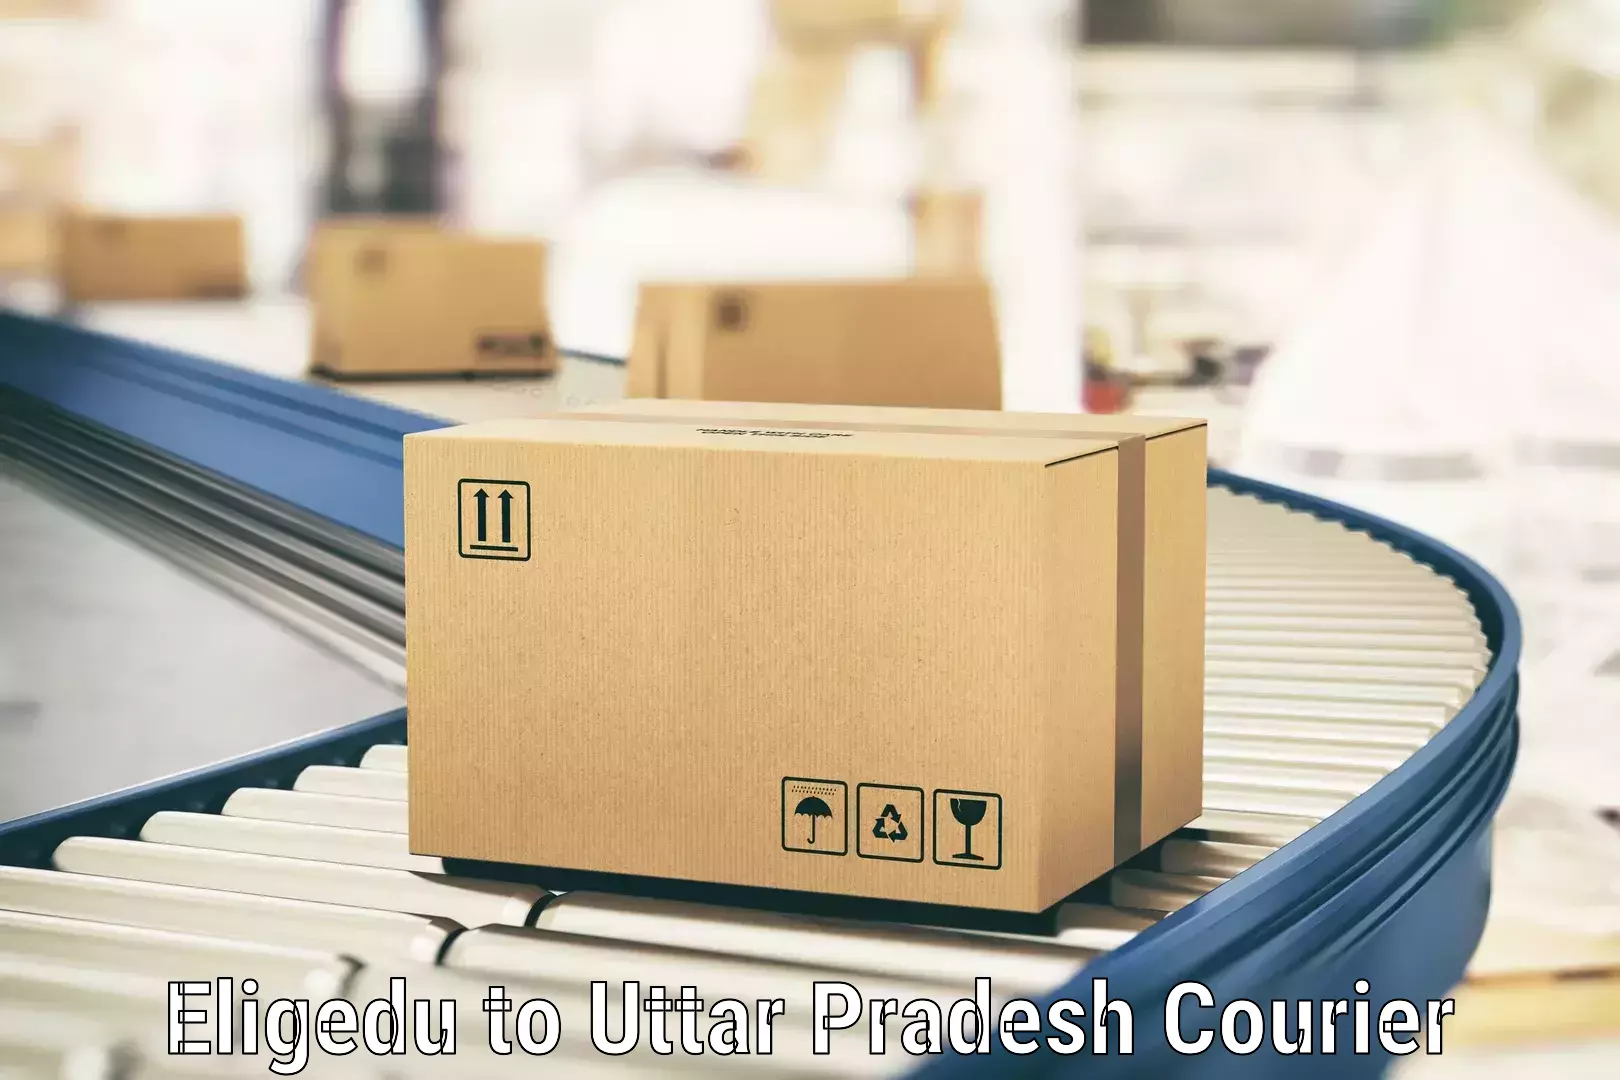 Courier service efficiency Eligedu to Sidhauli